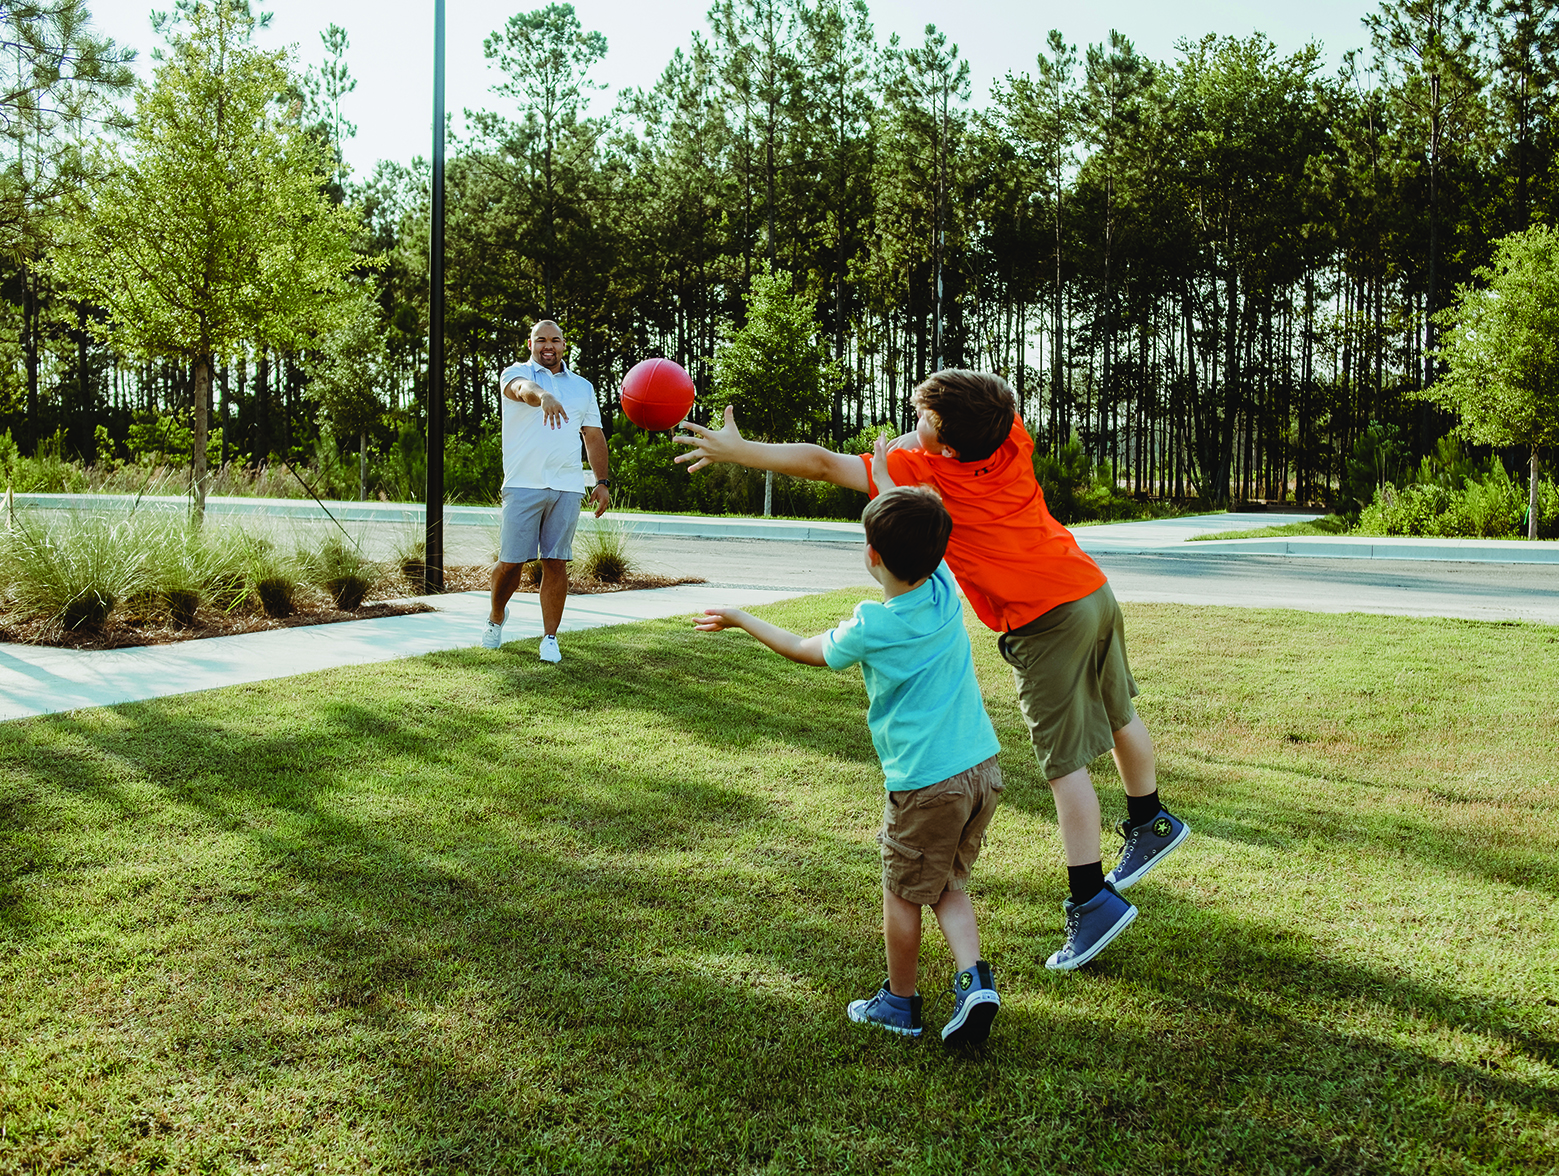 Dad tosses football with two boys in yard.